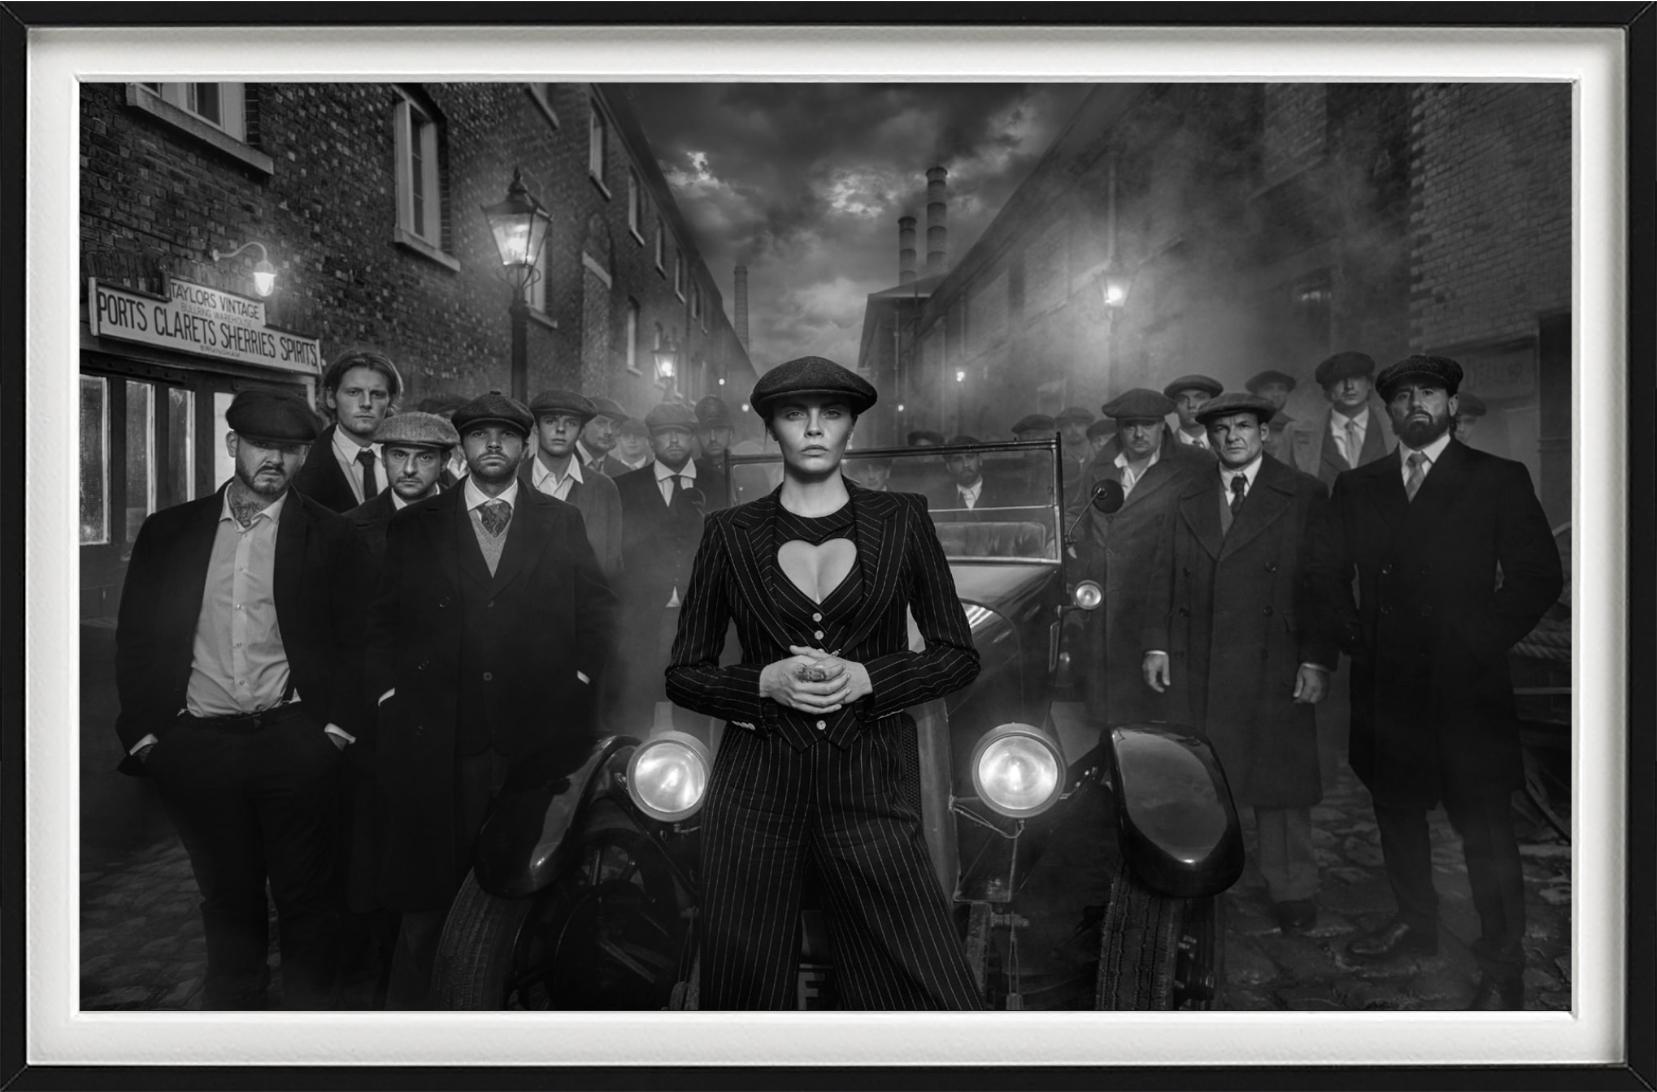 By order of the Peaky Blinders - Cara in the role of Thomas Shelby, 2023 - Photograph by David Yarrow